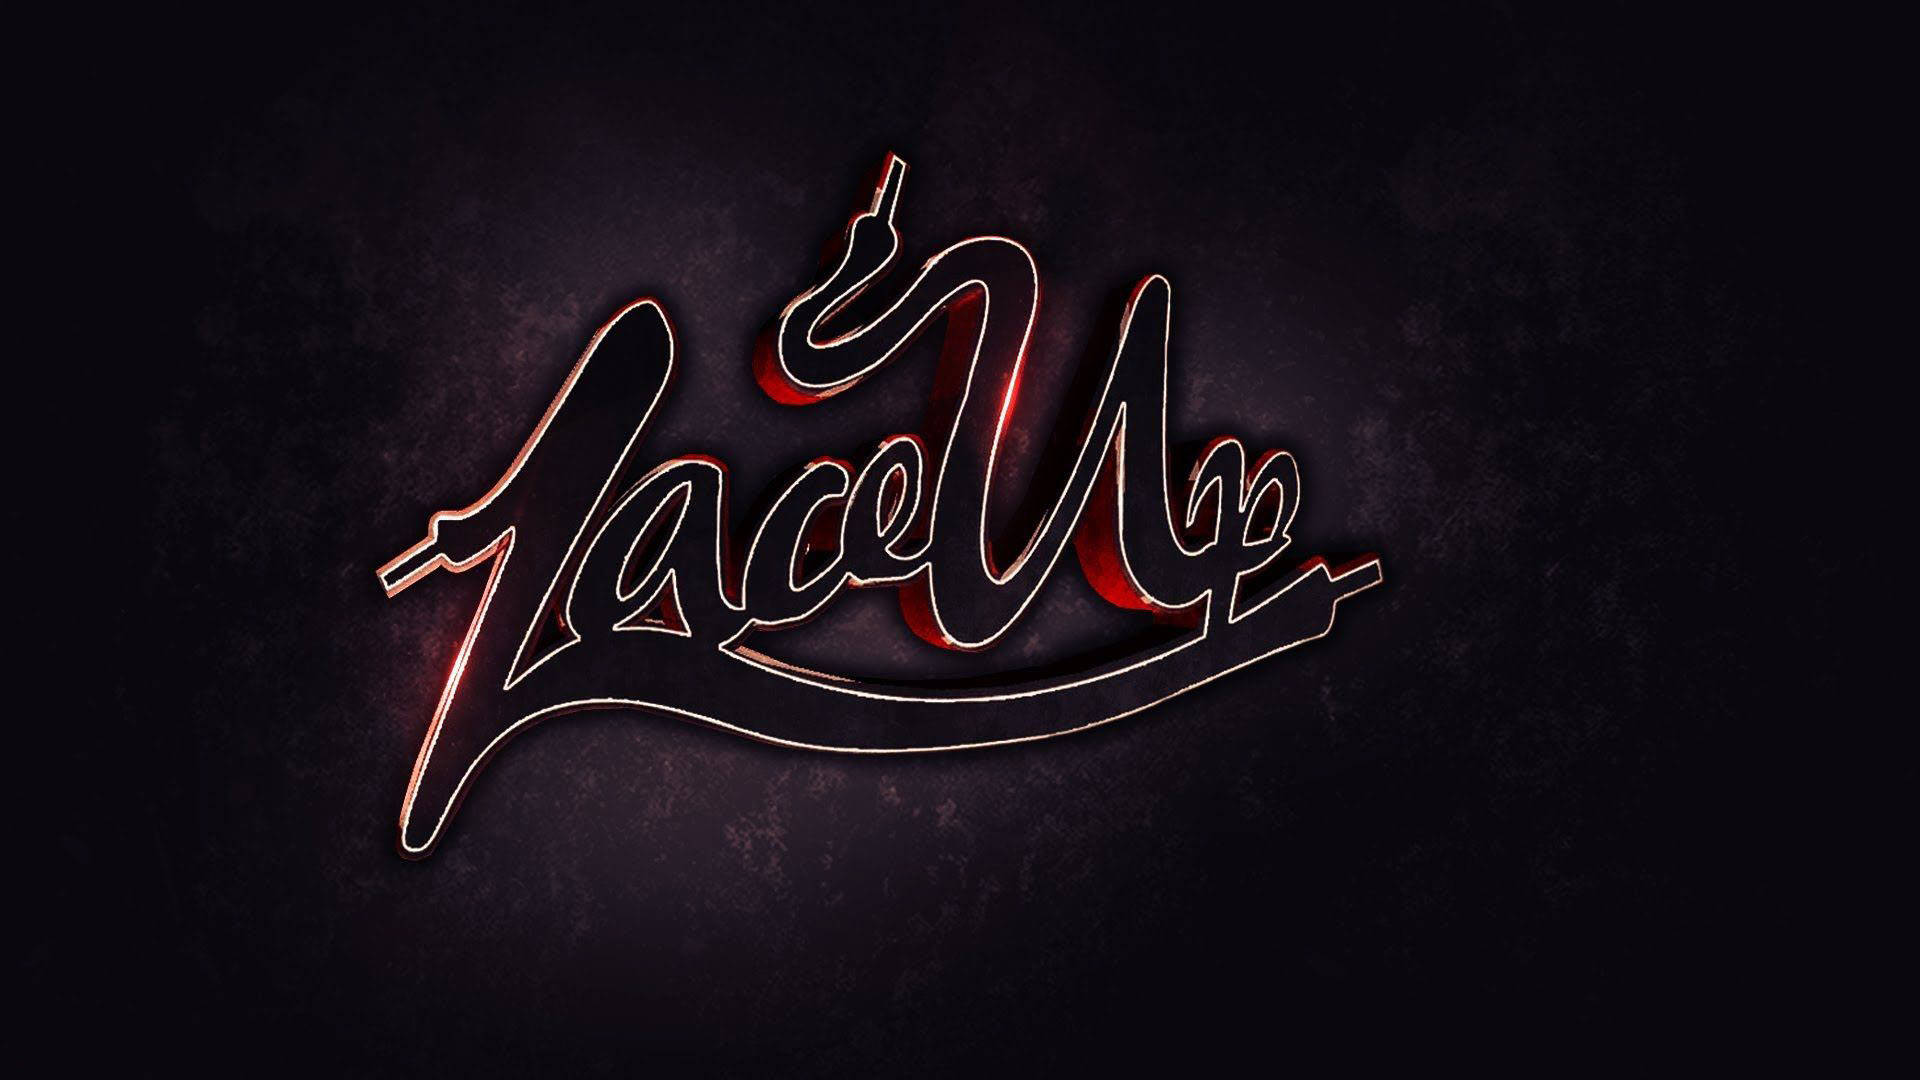 Glowing Lace Up Logo On A Black Background